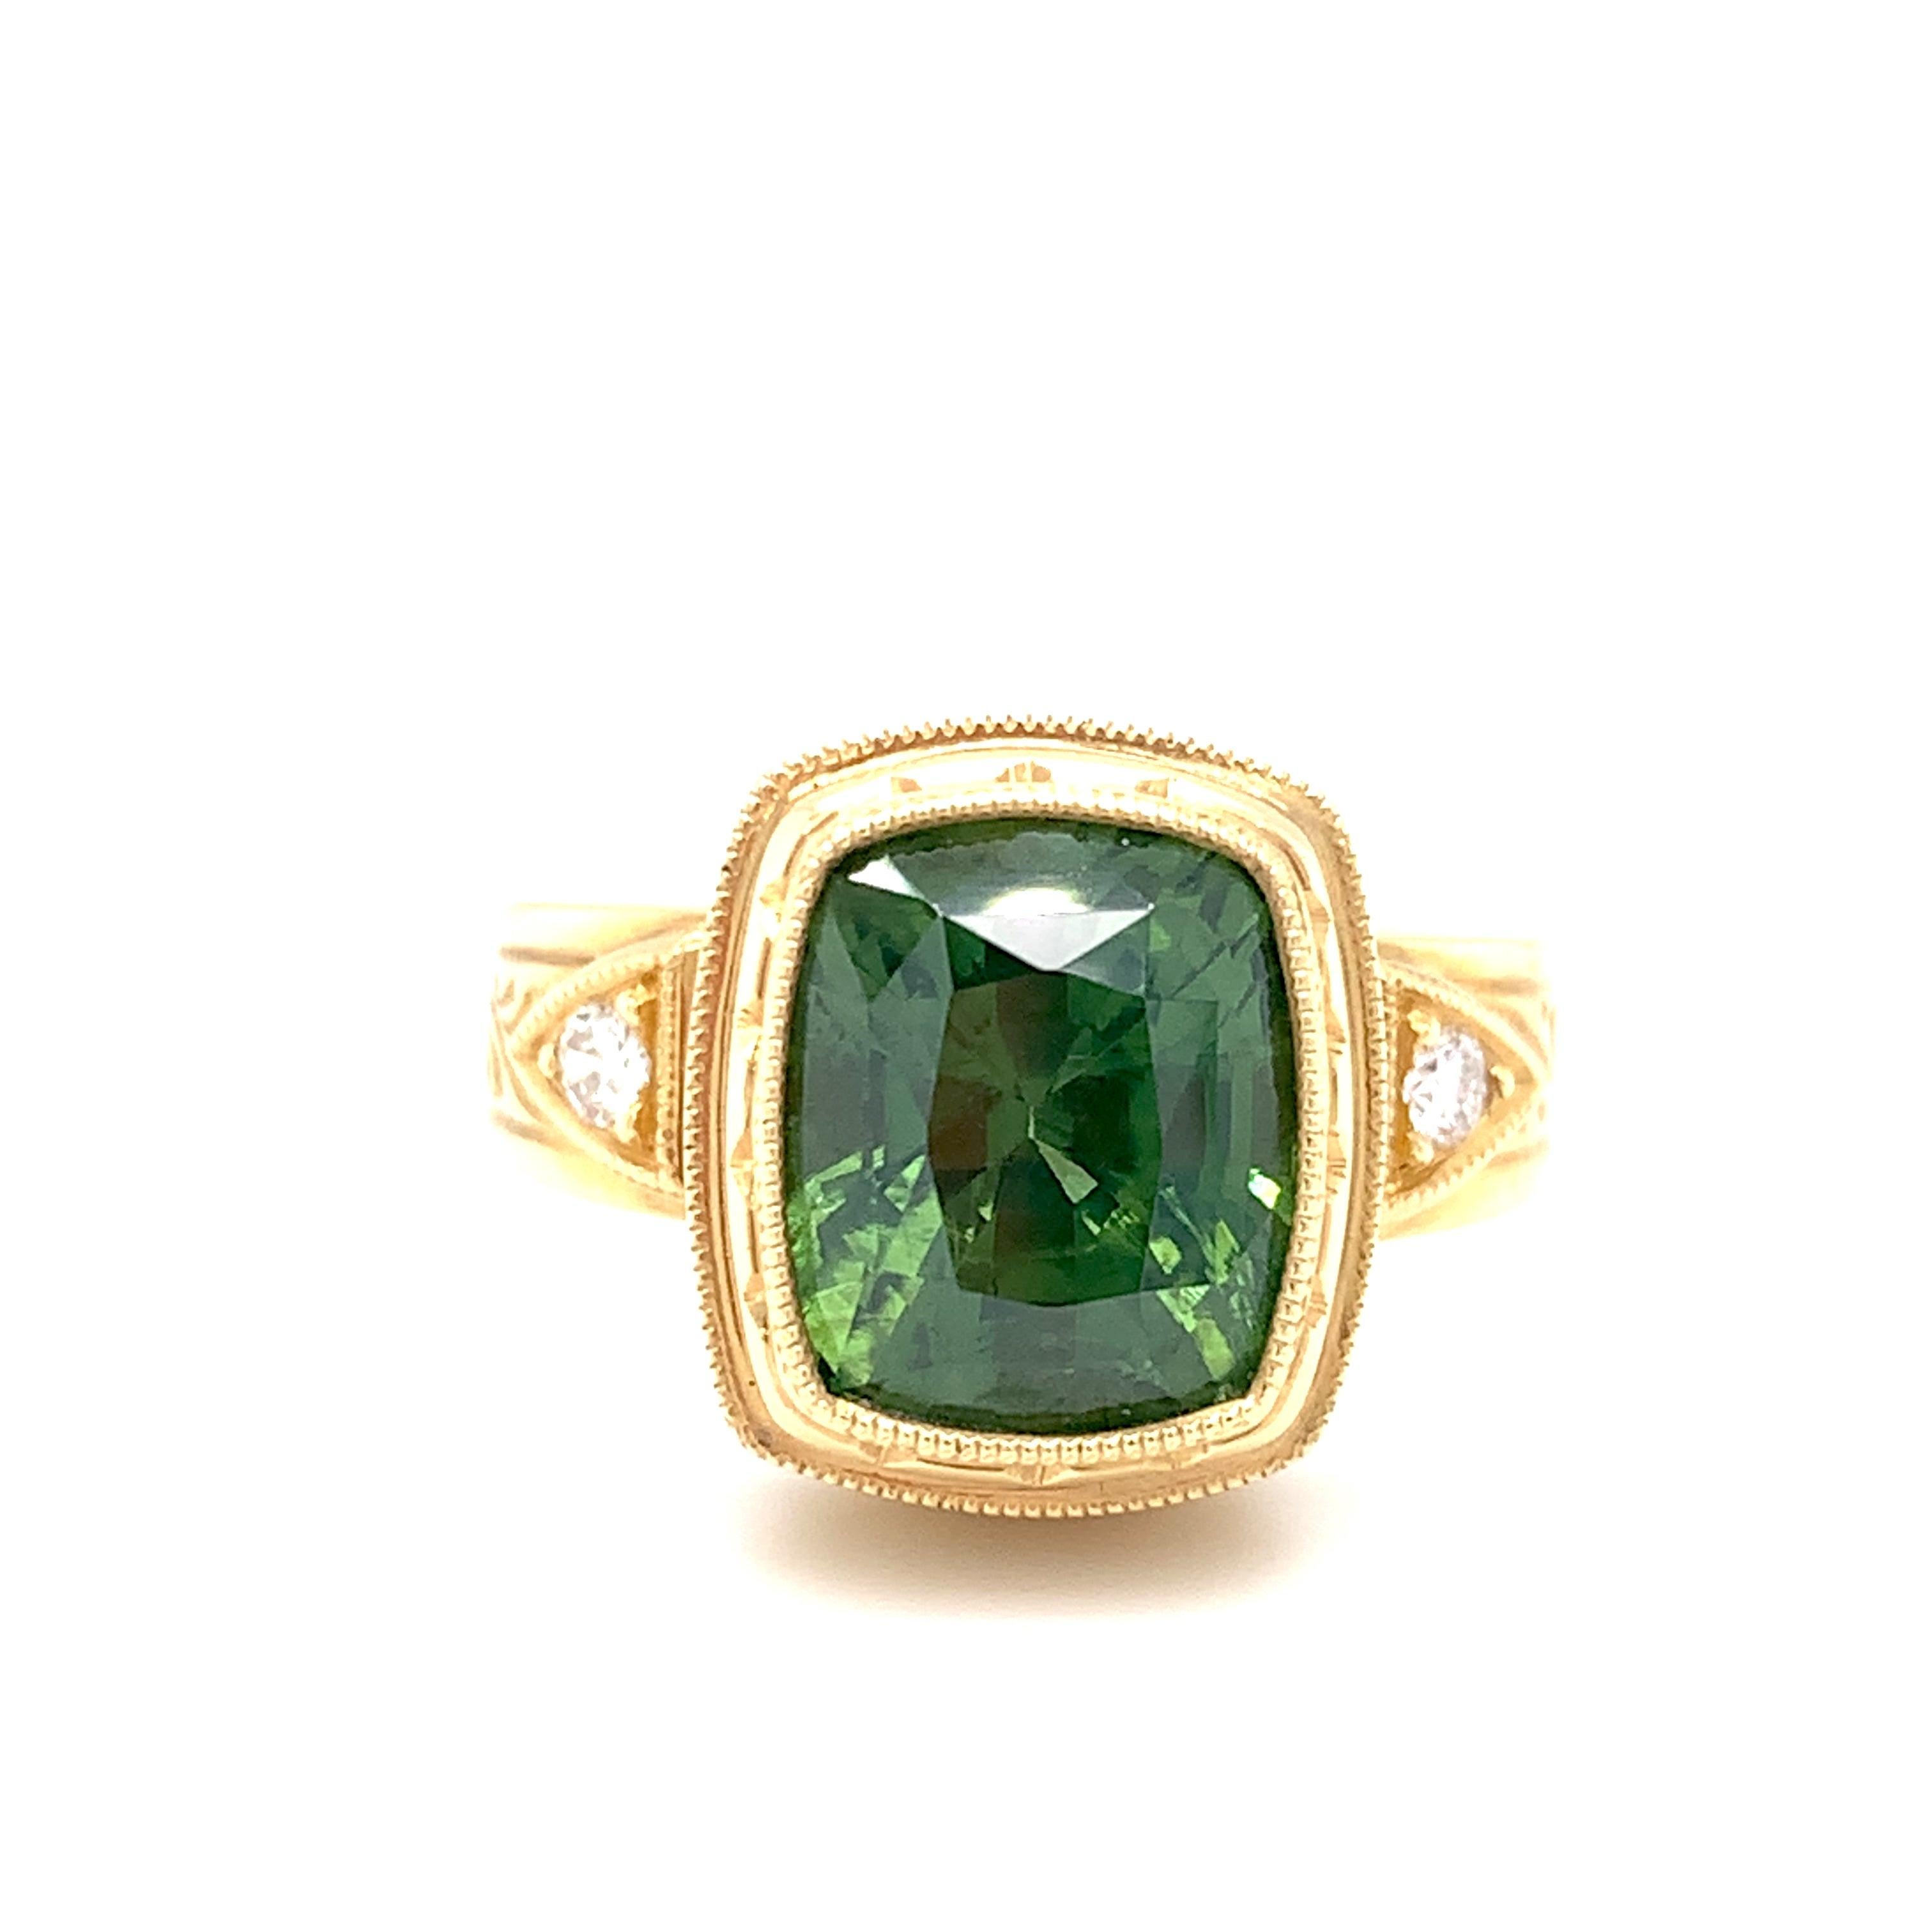 This beautifully handmade ring features a 5.38 carat green zircon set in an intricately hand engraved 18k yellow gold bezel. Two brilliant cut white diamonds add sparkle to this design, which is one of our signature favorites. Zircon occurs in a